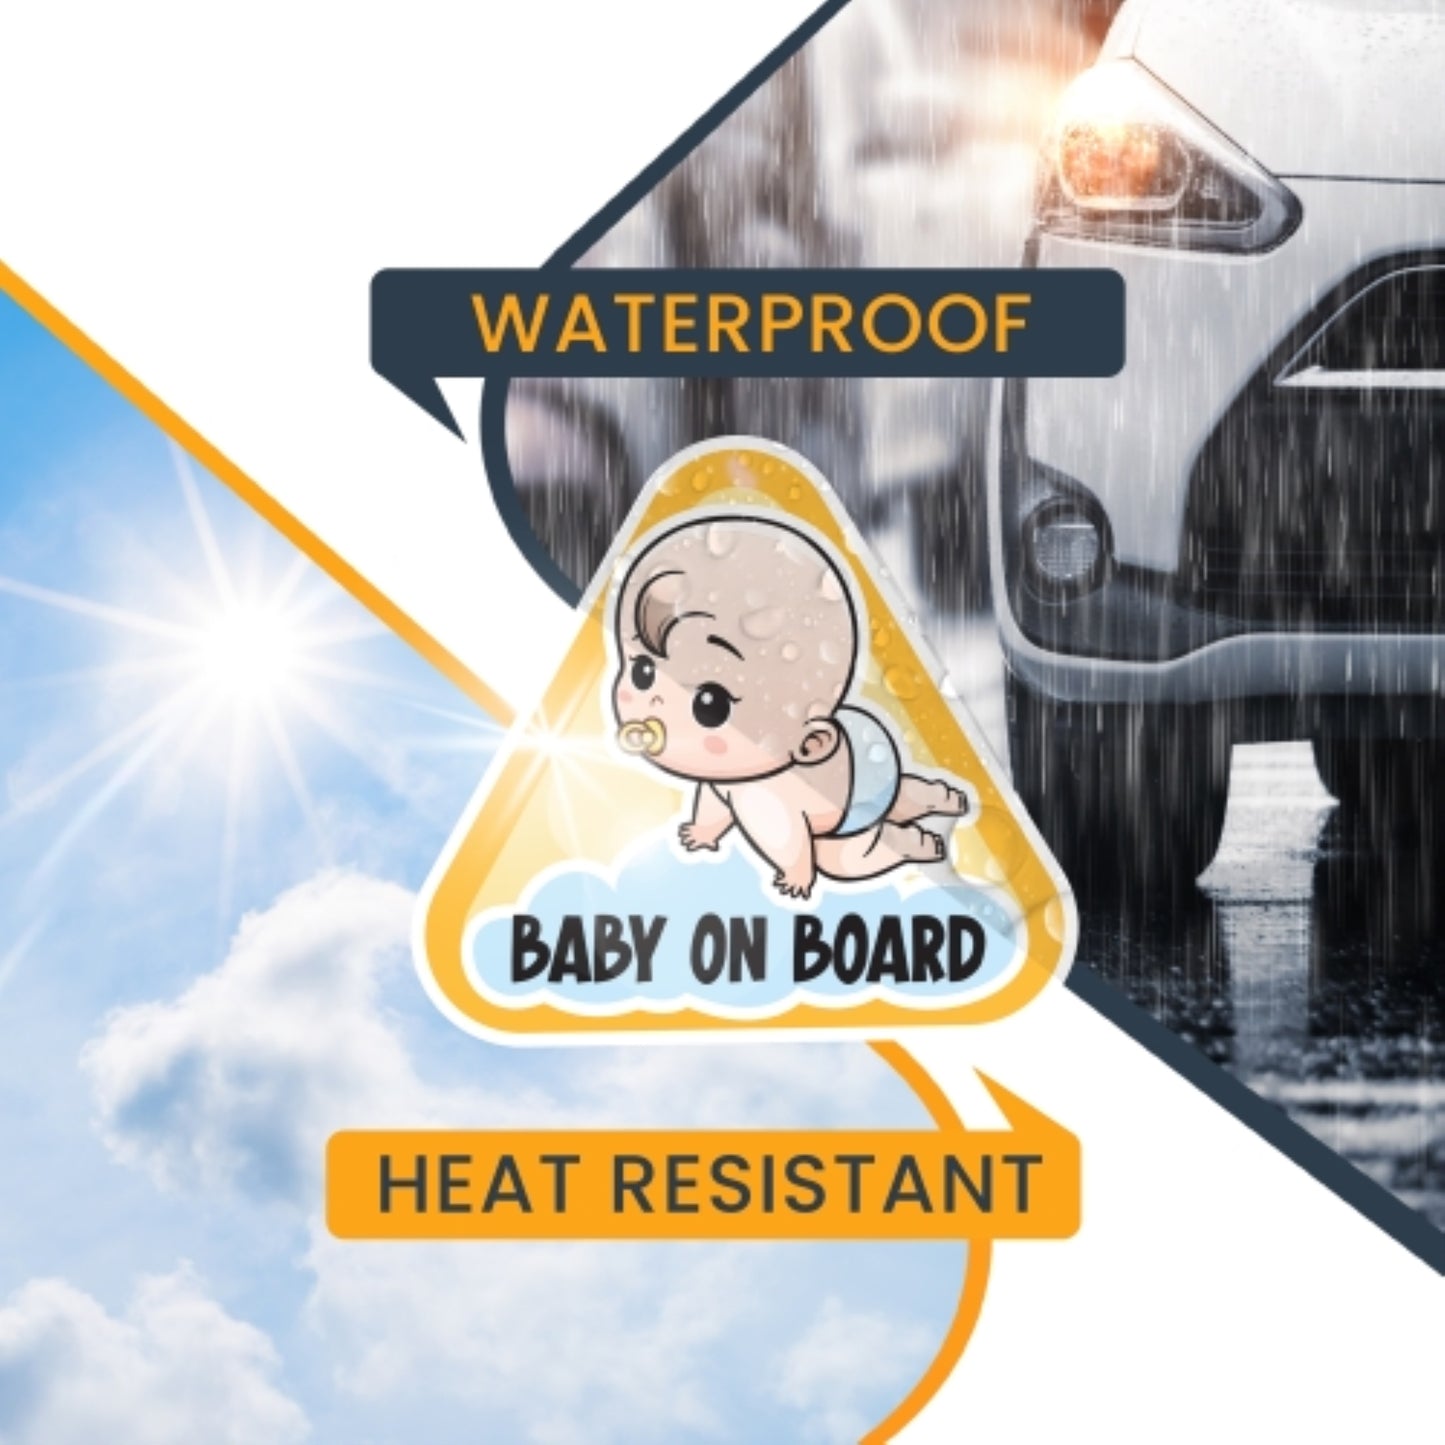 Magnet Me Up Boy Baby Babies On Board Magnet Decal, 5 inches, Heavy Duty Safety Automotive Magnet for Car Truck SUV Or Any Other Magnetic Surface